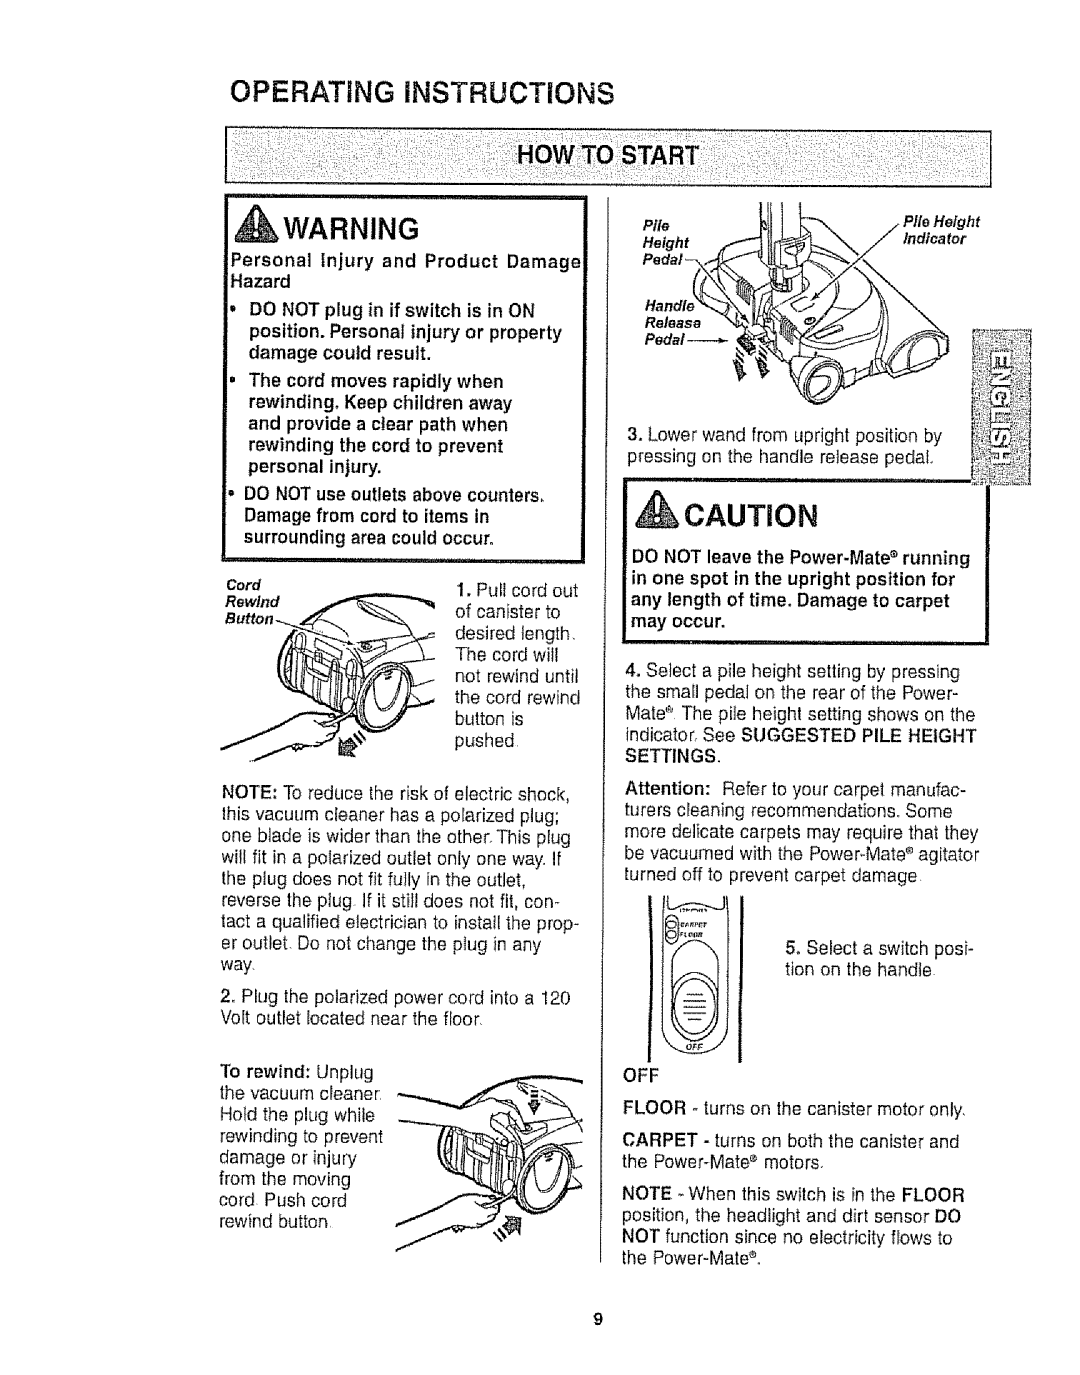 Kenmore 116.25812 owner manual OPERATING iNSTRUCTiONS, personal injury, Cord, Rewind, ++++++:,7, Settings 